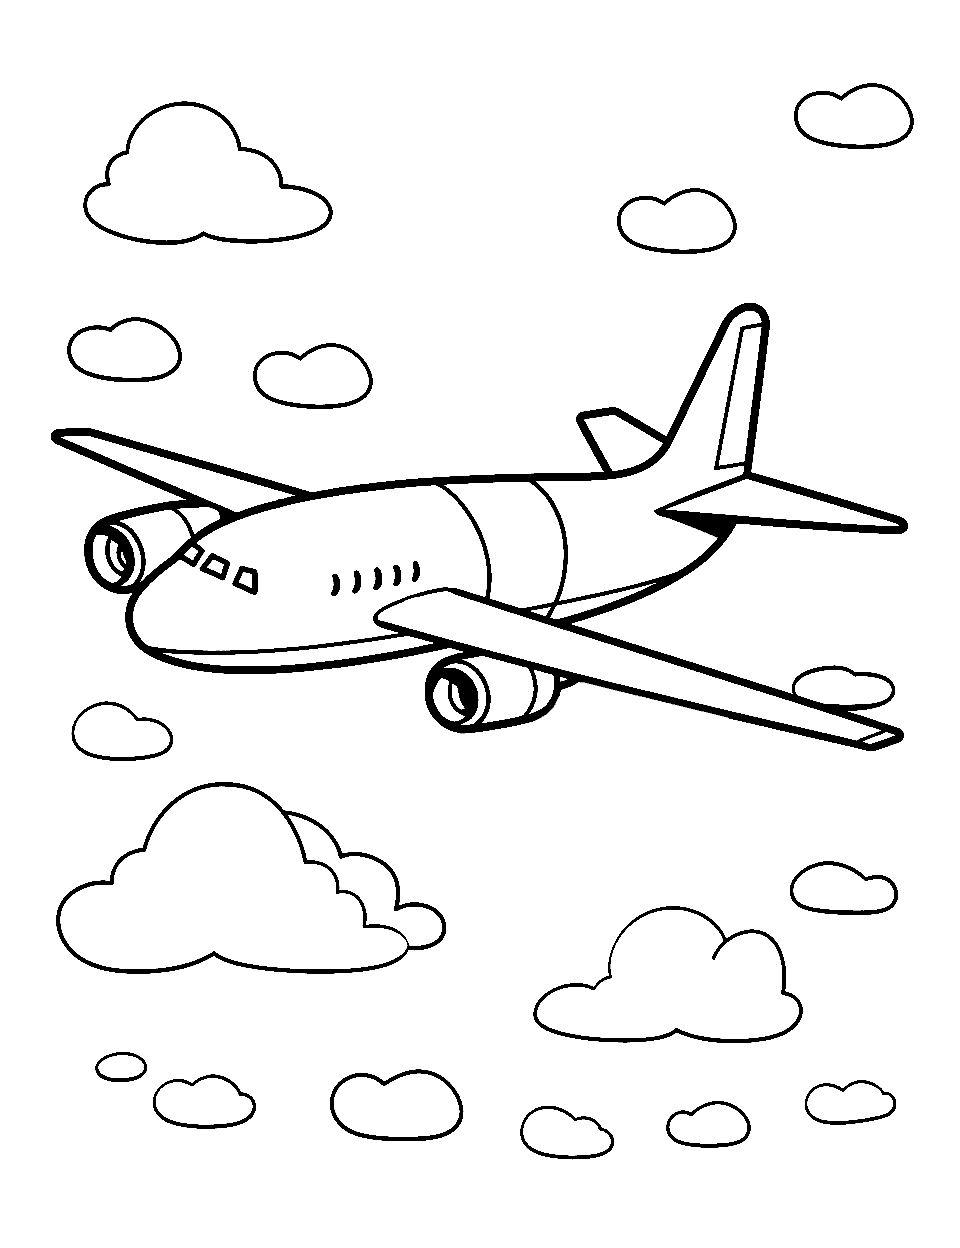 Airplane Ascension Coloring Page - An airplane flying in the sky with clouds.